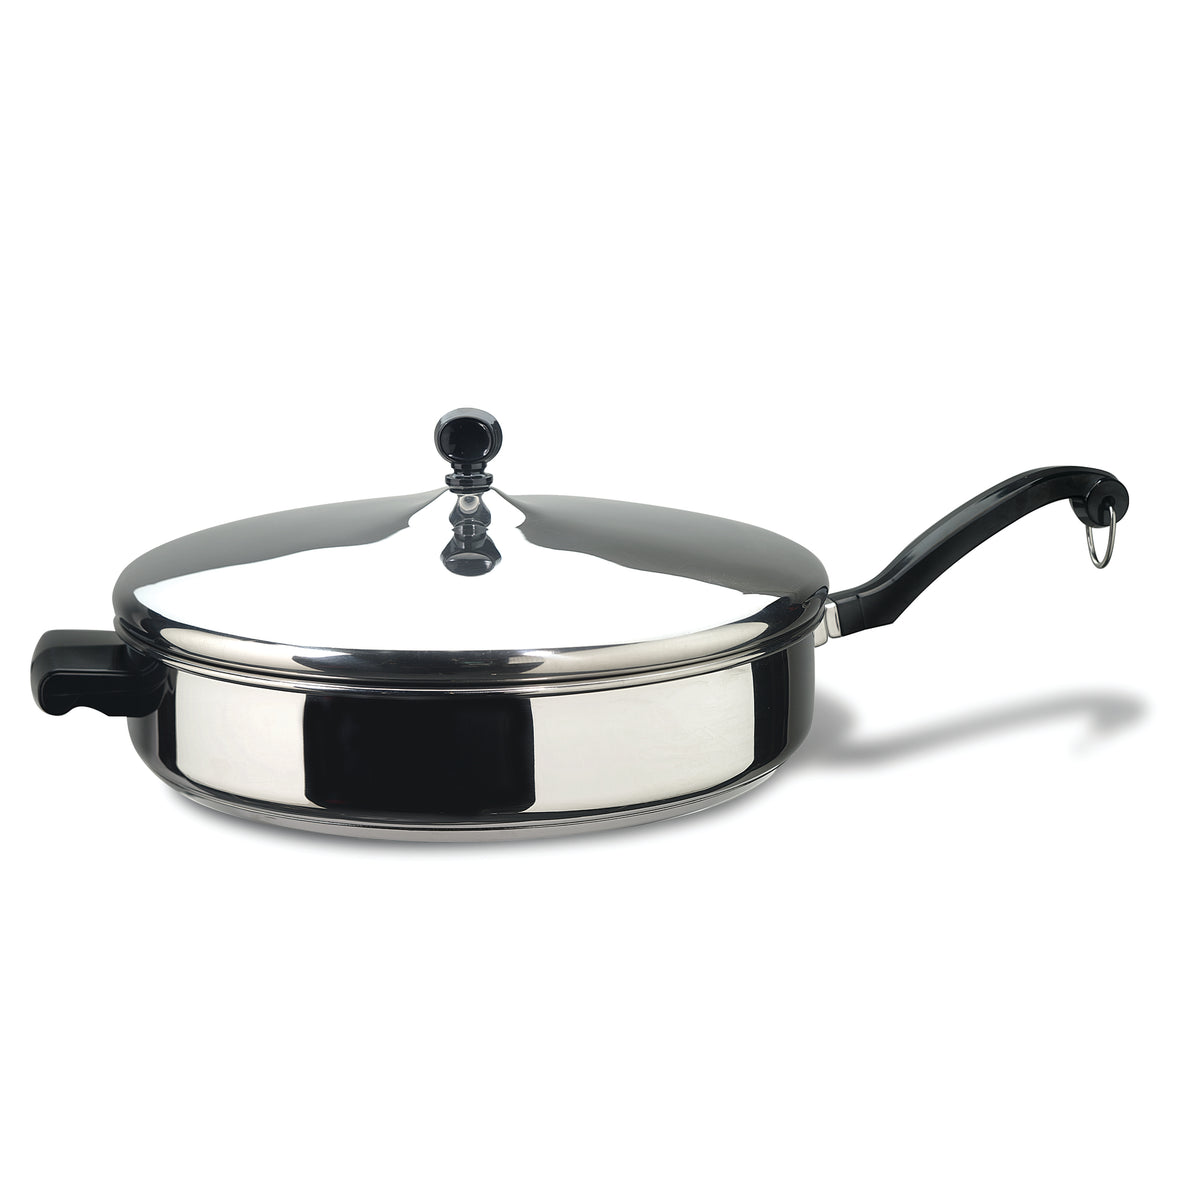 Farberware Classic Series 12 inch Covered Stainless Steel Frying Pan